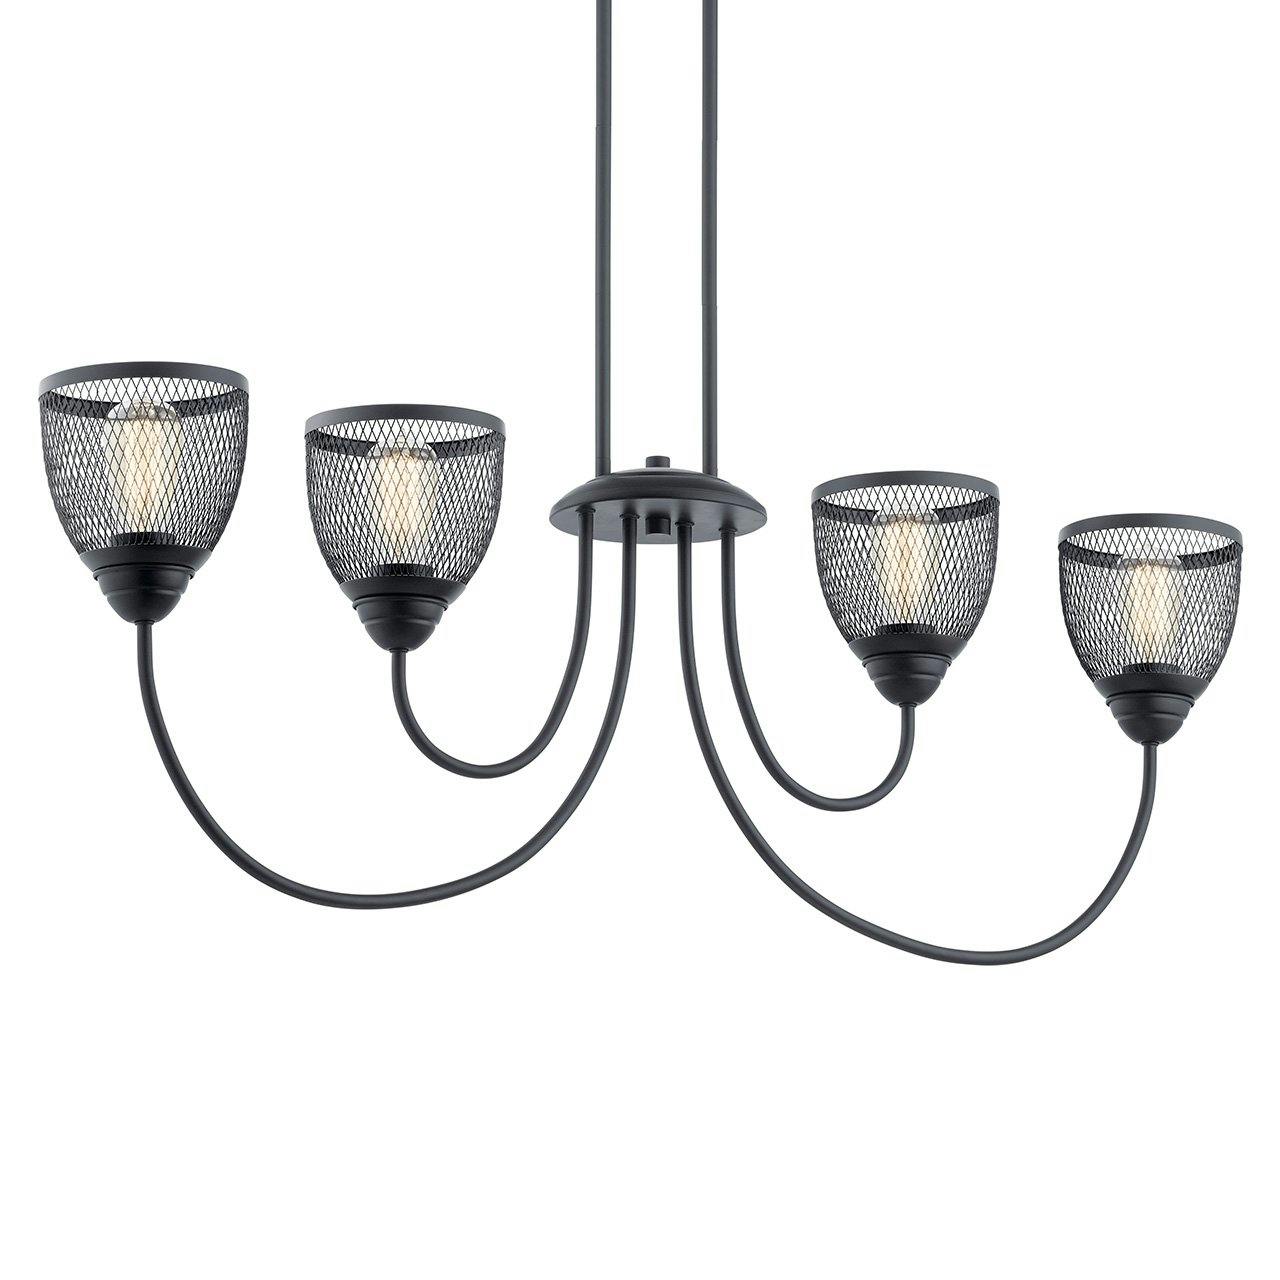 Voclain™ 4 Light Linear Chandelier Black without the canopy on a white background